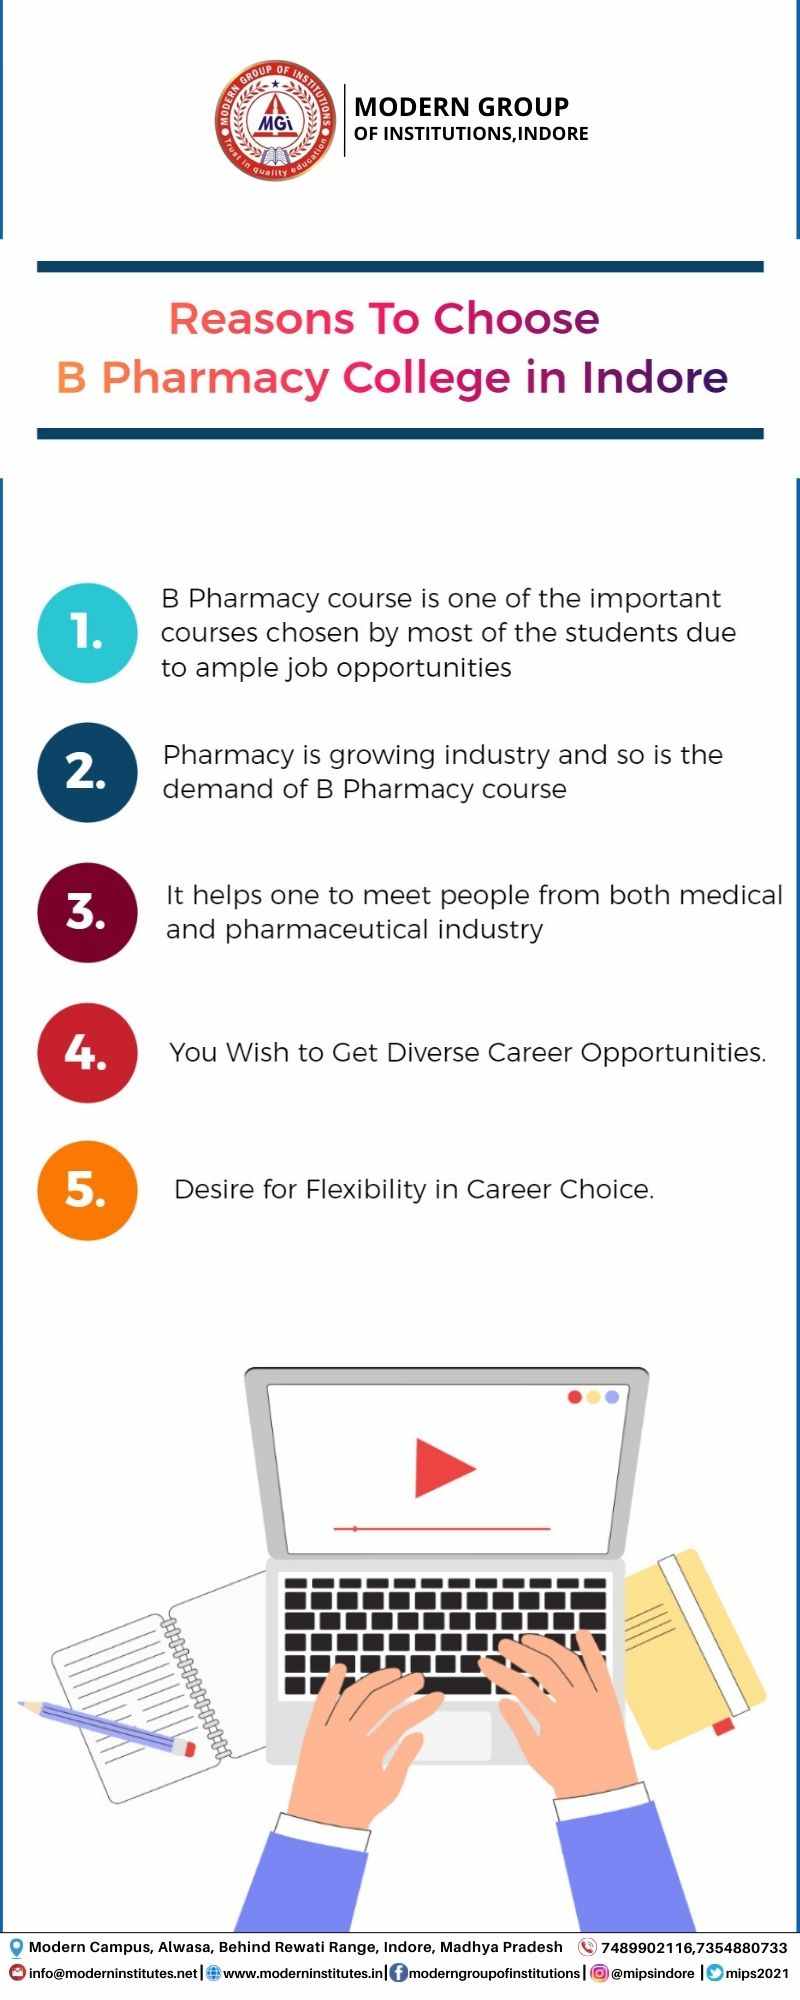 Reasons To Choose B Pharmacy College in Indore